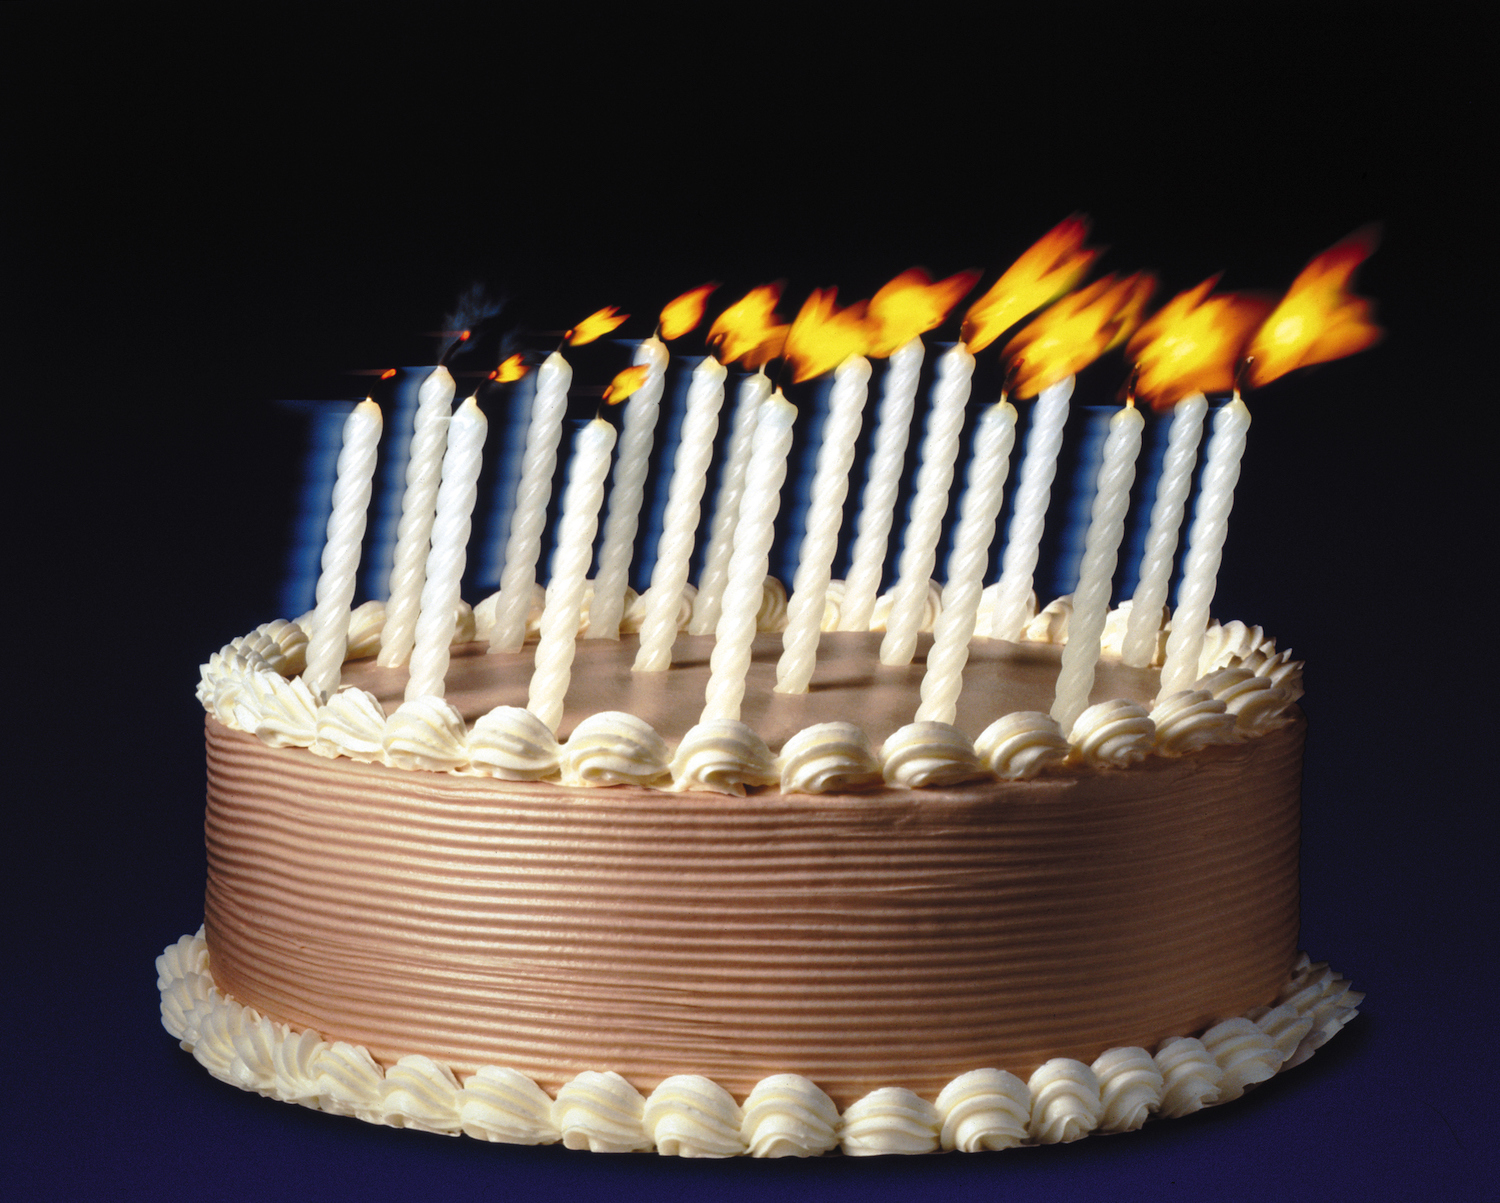 A frosted cake with candles that are being blown upon as if someone just out of frame were making a wish